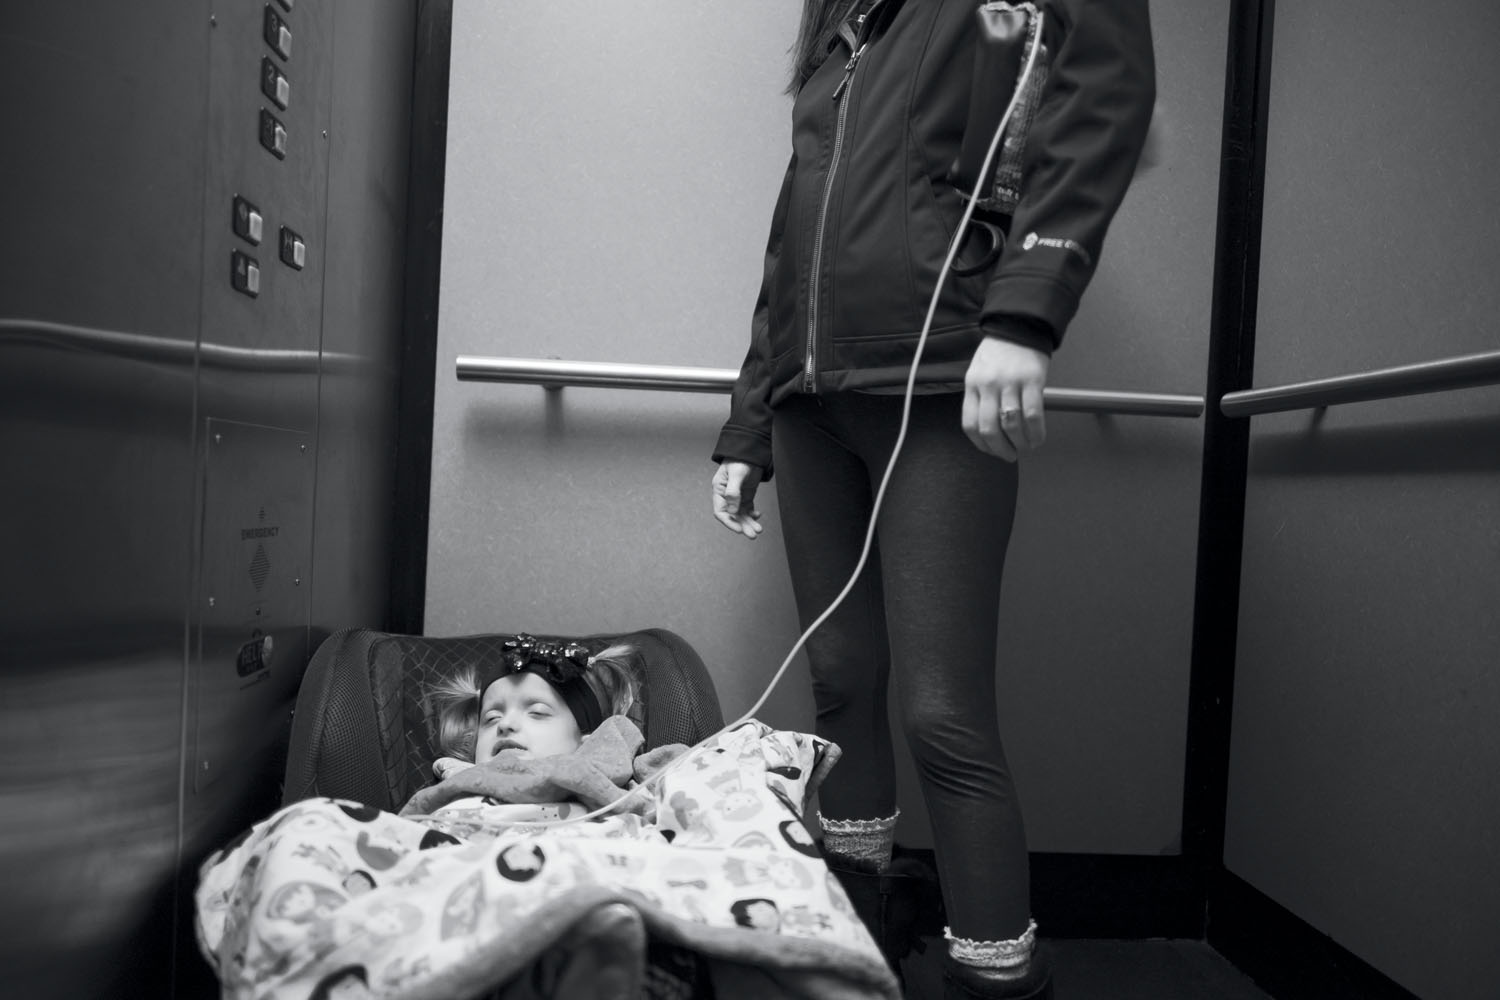 Maddie and Meaghan Holt on their way home from the hospital. Because of her condition, Maddie required intravenous feeding. Mount Vernon, WA, December 2017.